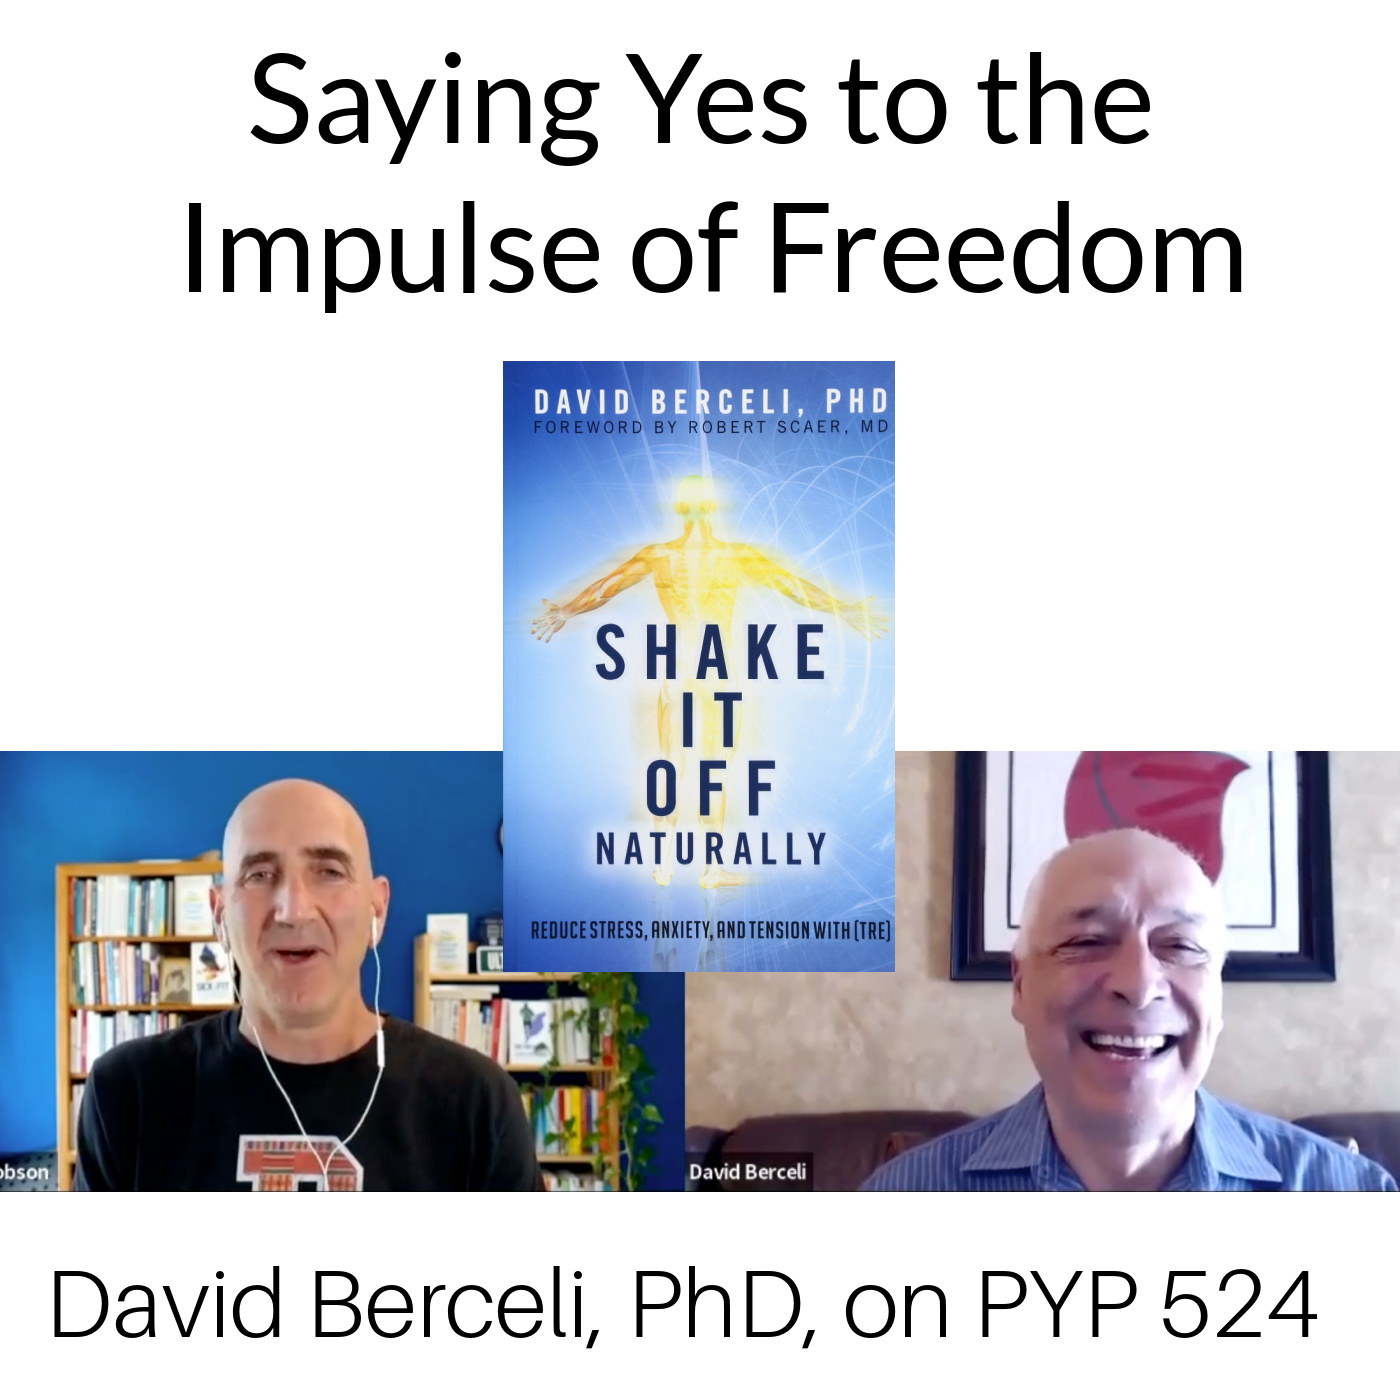 Saying Yes to the Impulse of Freedom: David Berceli, PhD on PYP 524